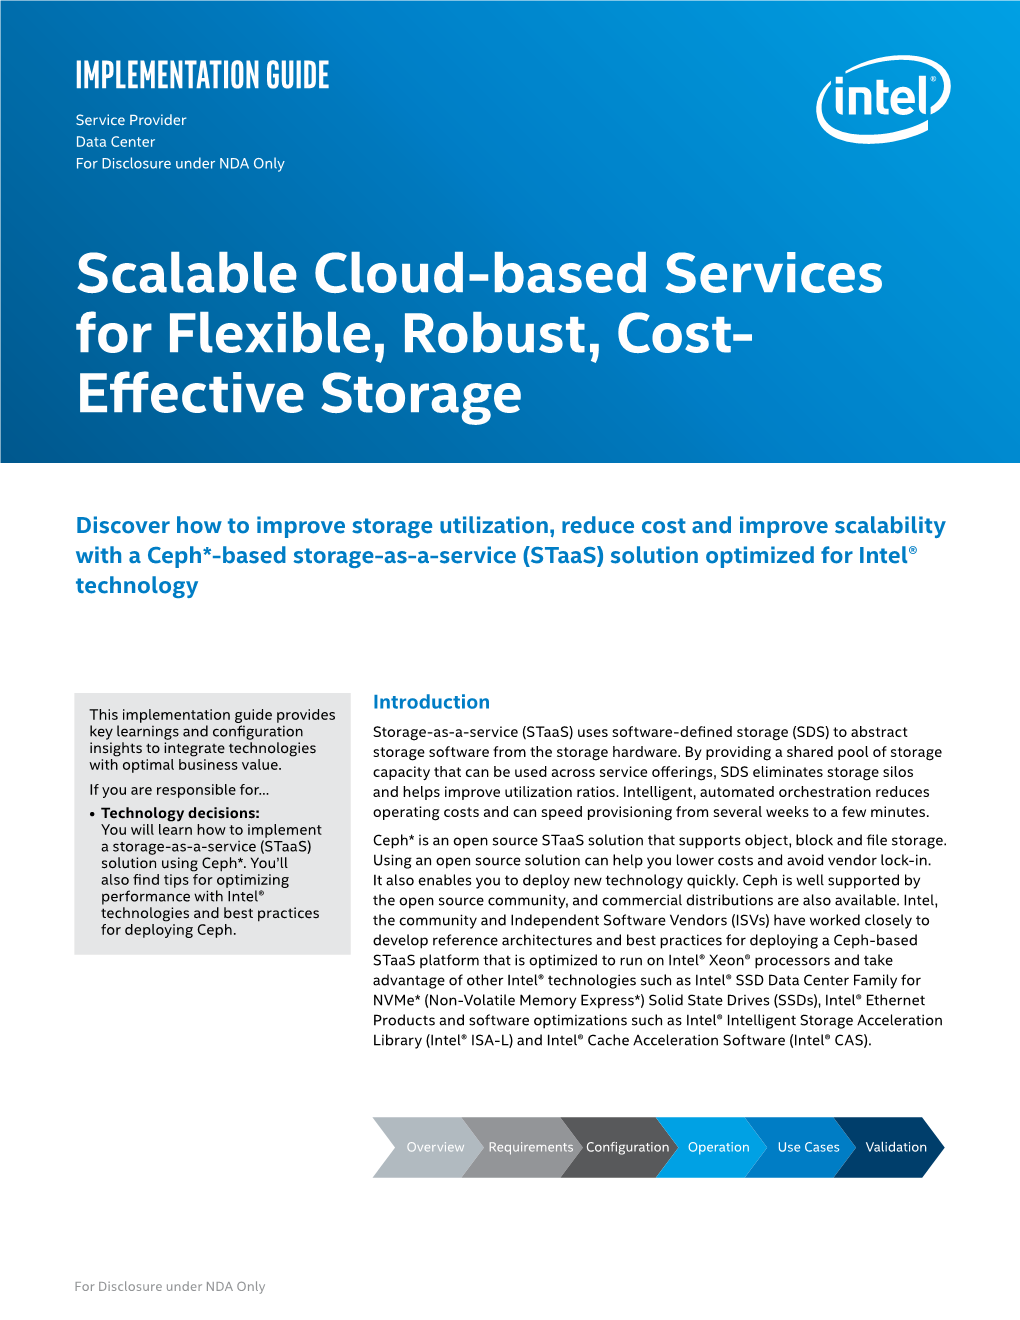 Scalable Cloud-Based Services for Flexible Storage: Implementation